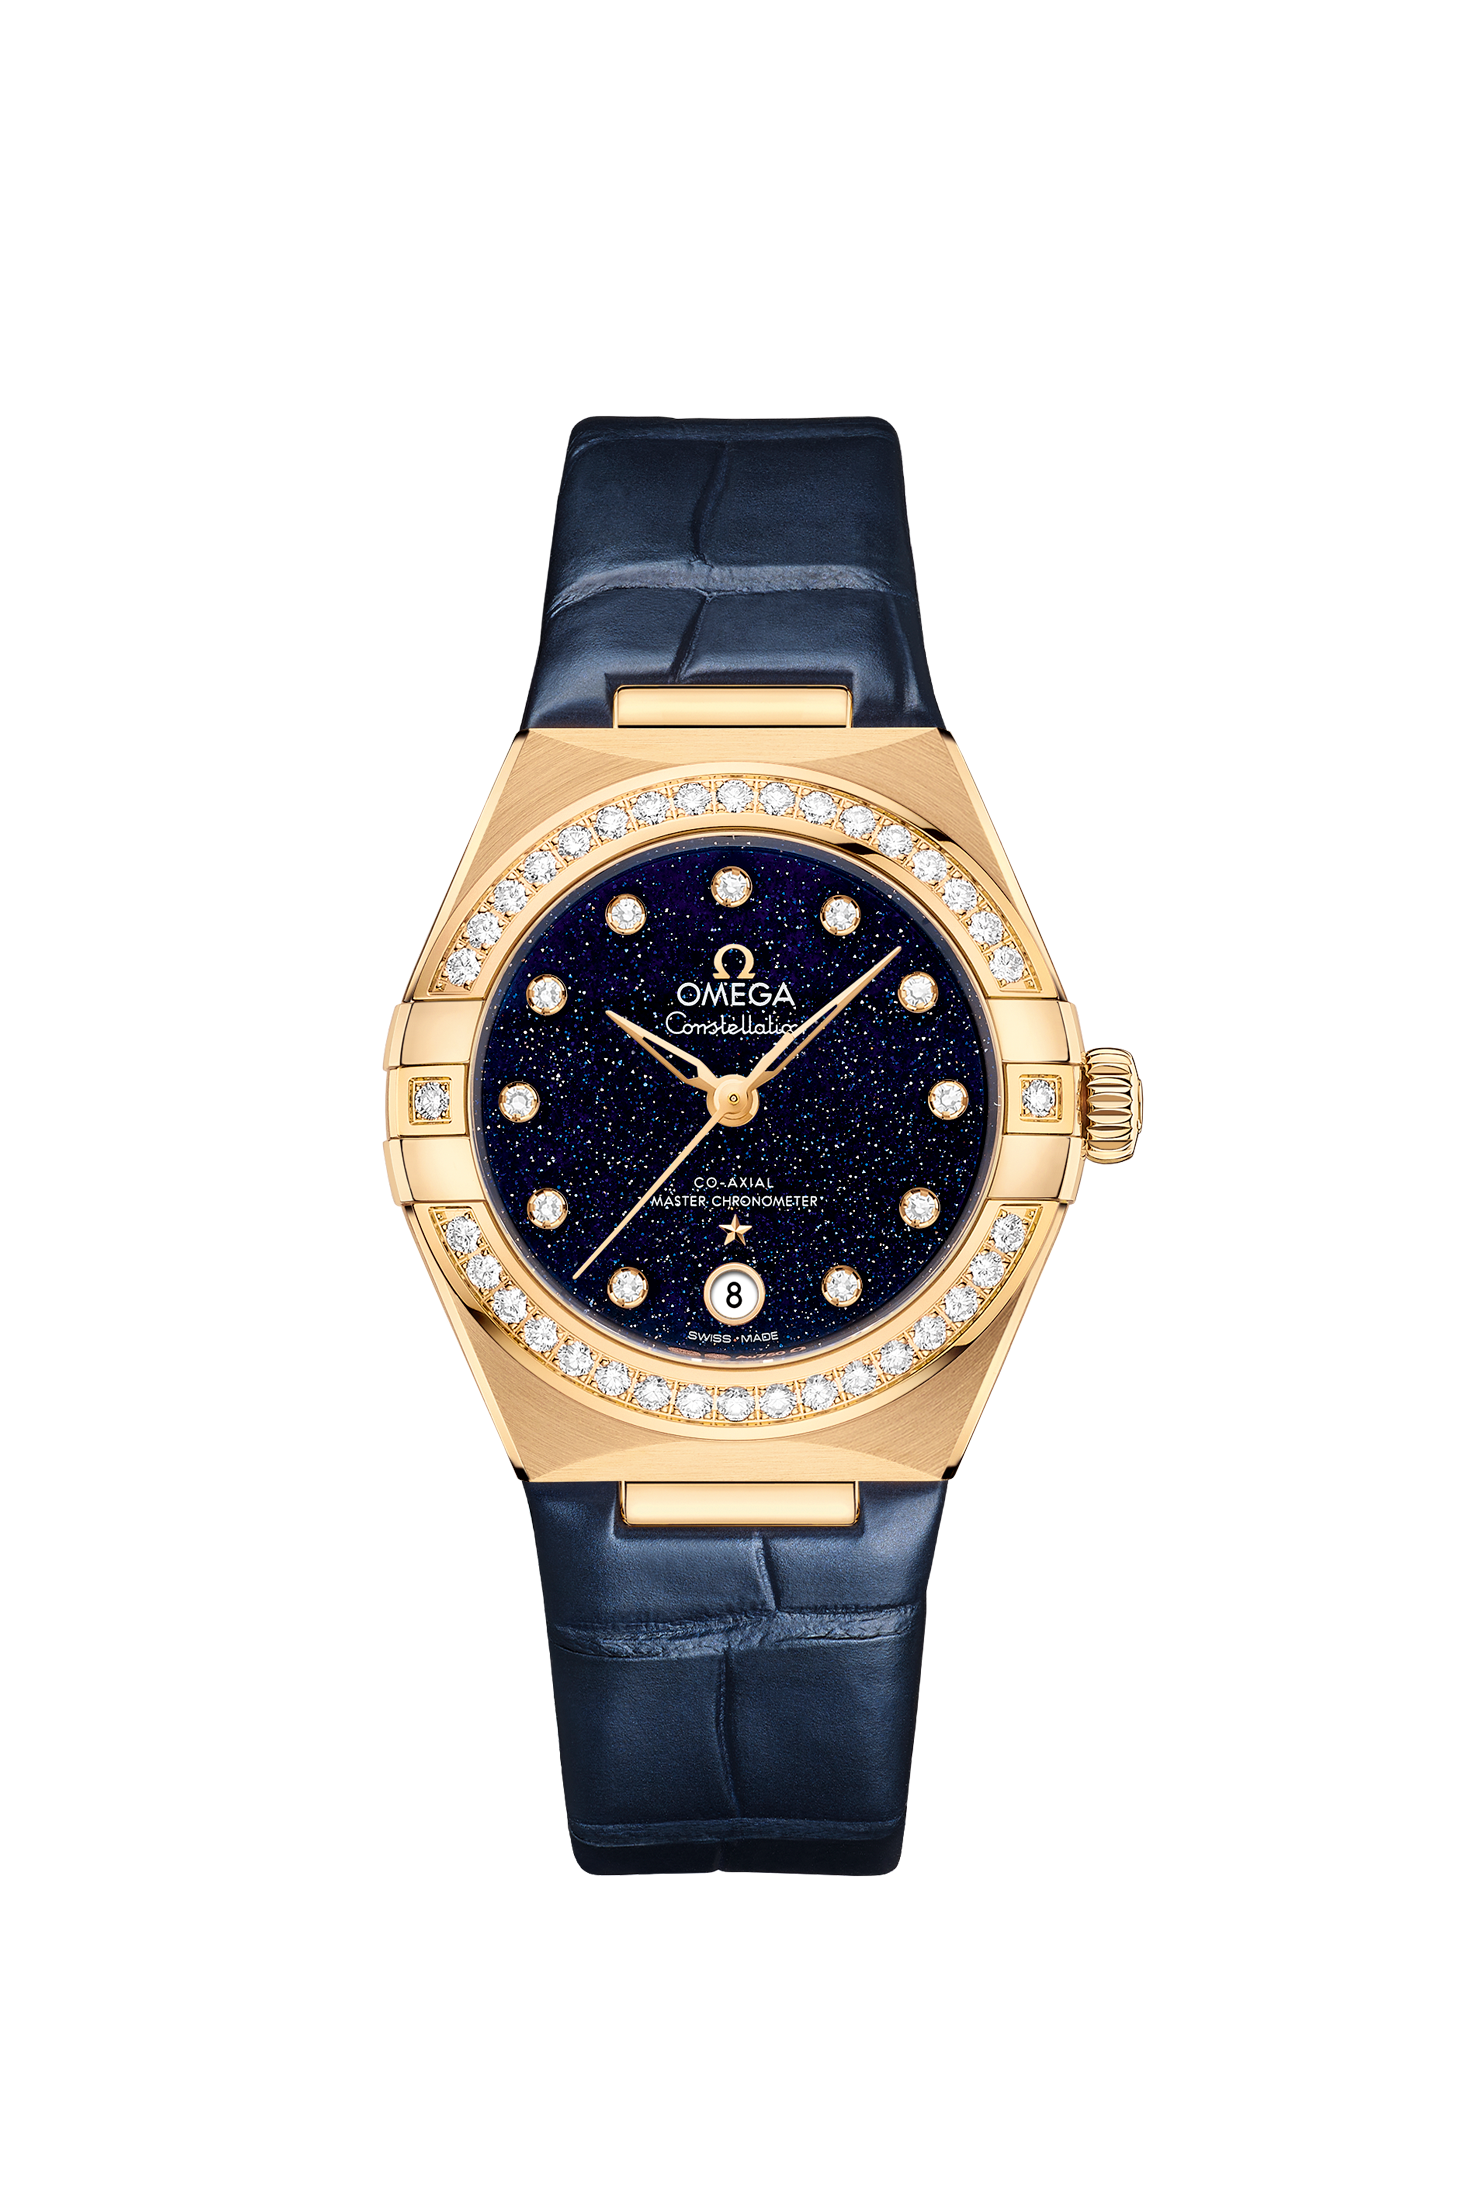 Ladies' watch  OMEGA, Constellation Co Axial Master Chronometer / 29mm, SKU: 131.58.29.20.53.001 | watchapproach.com